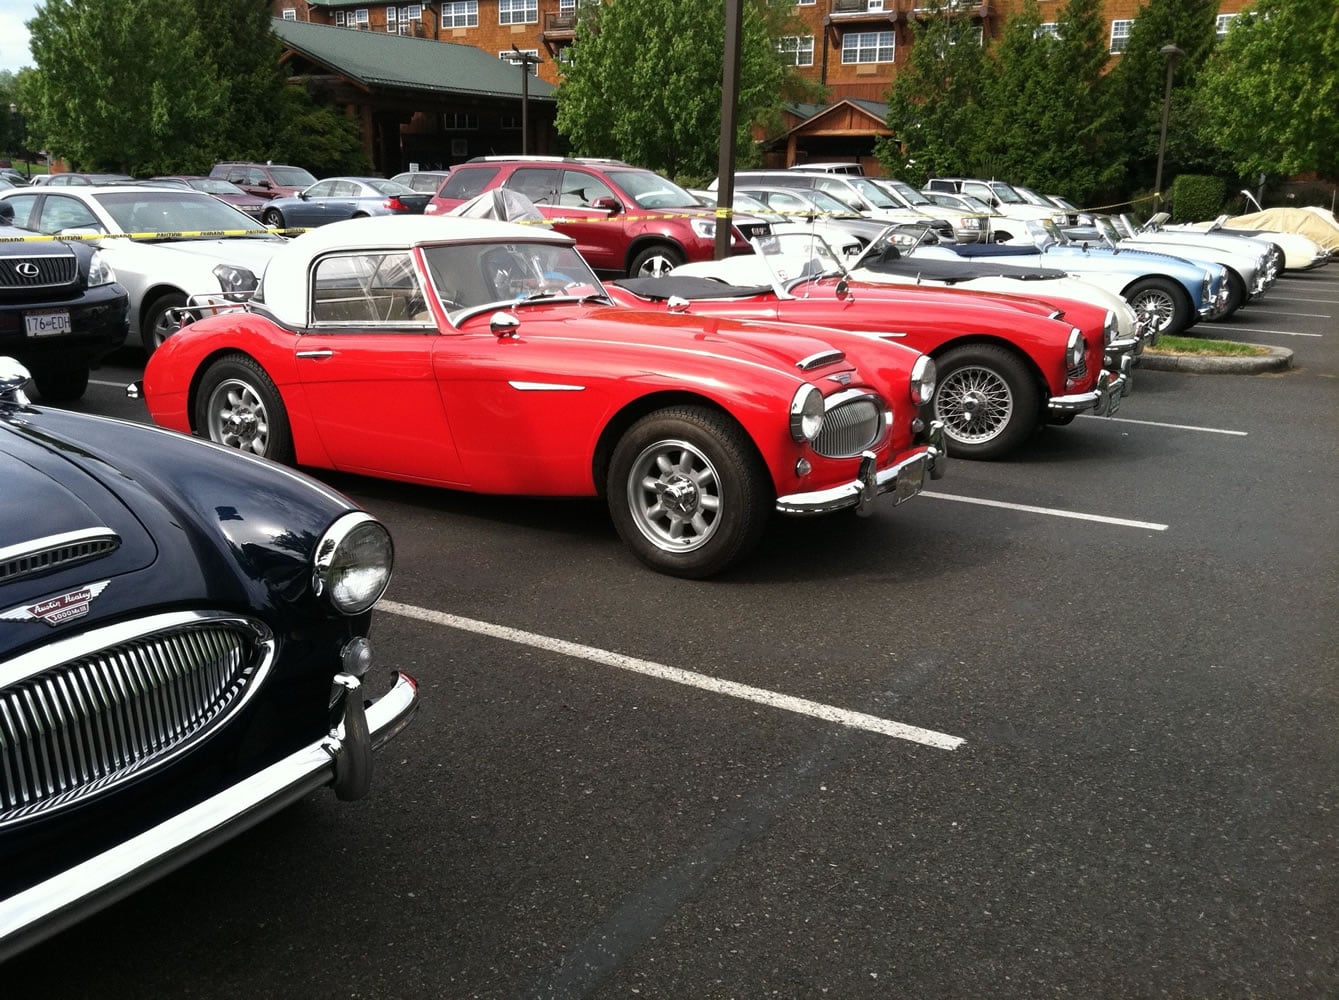 The Austin Healey Club of Oregon is meeting in Vancouver this week.